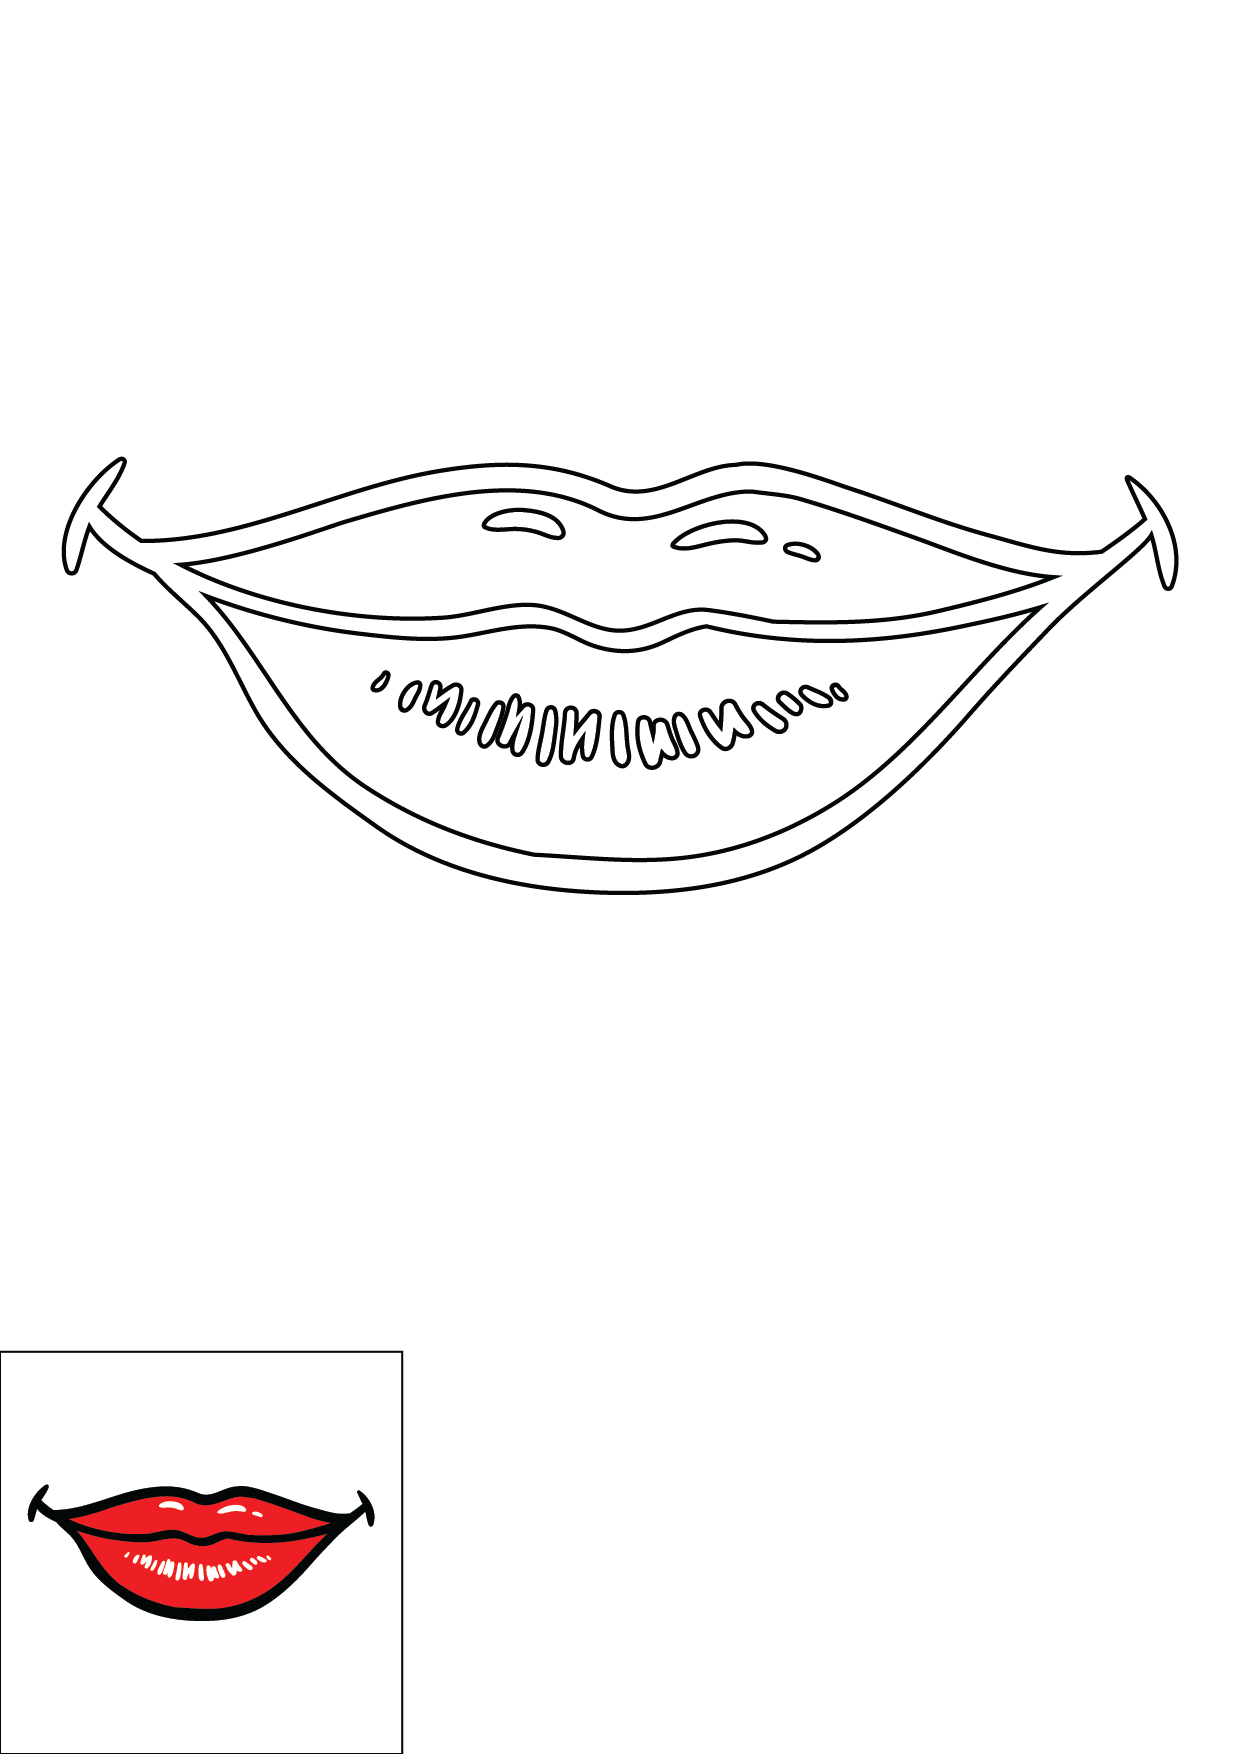 How to Draw A Lips Step by Step Printable Color